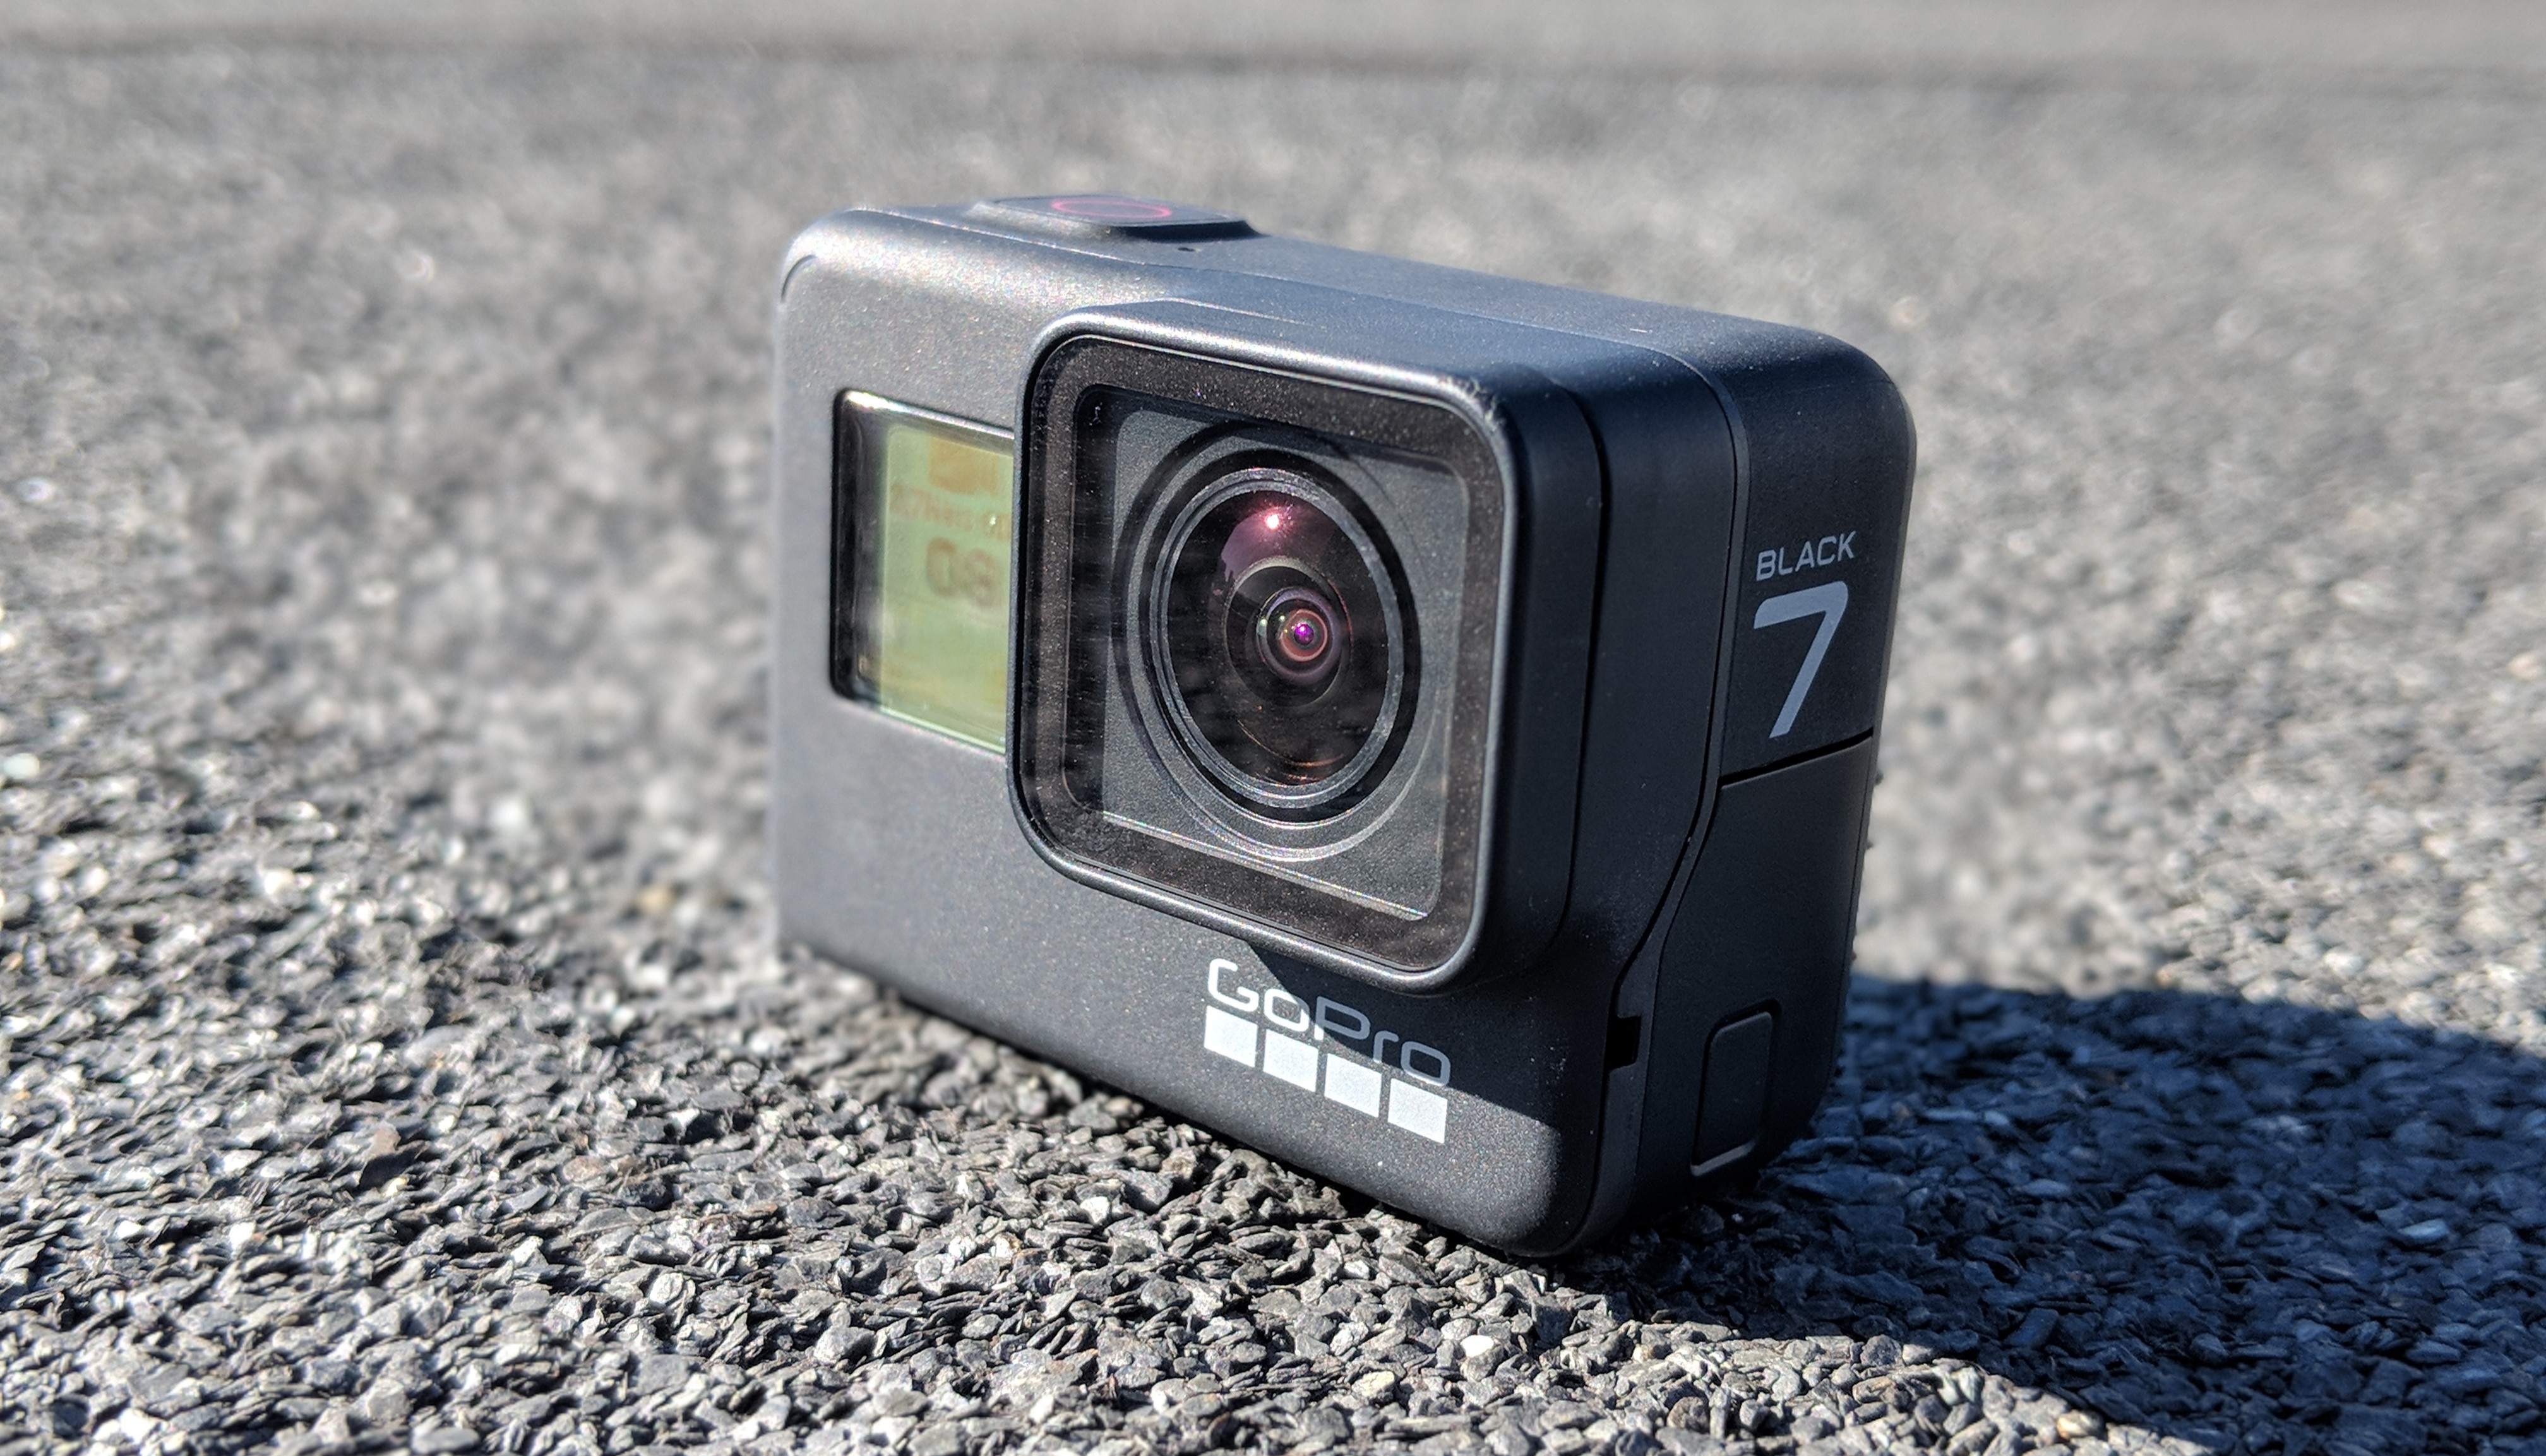 Review: With the Hero7 Black, GoPro looks towards stability